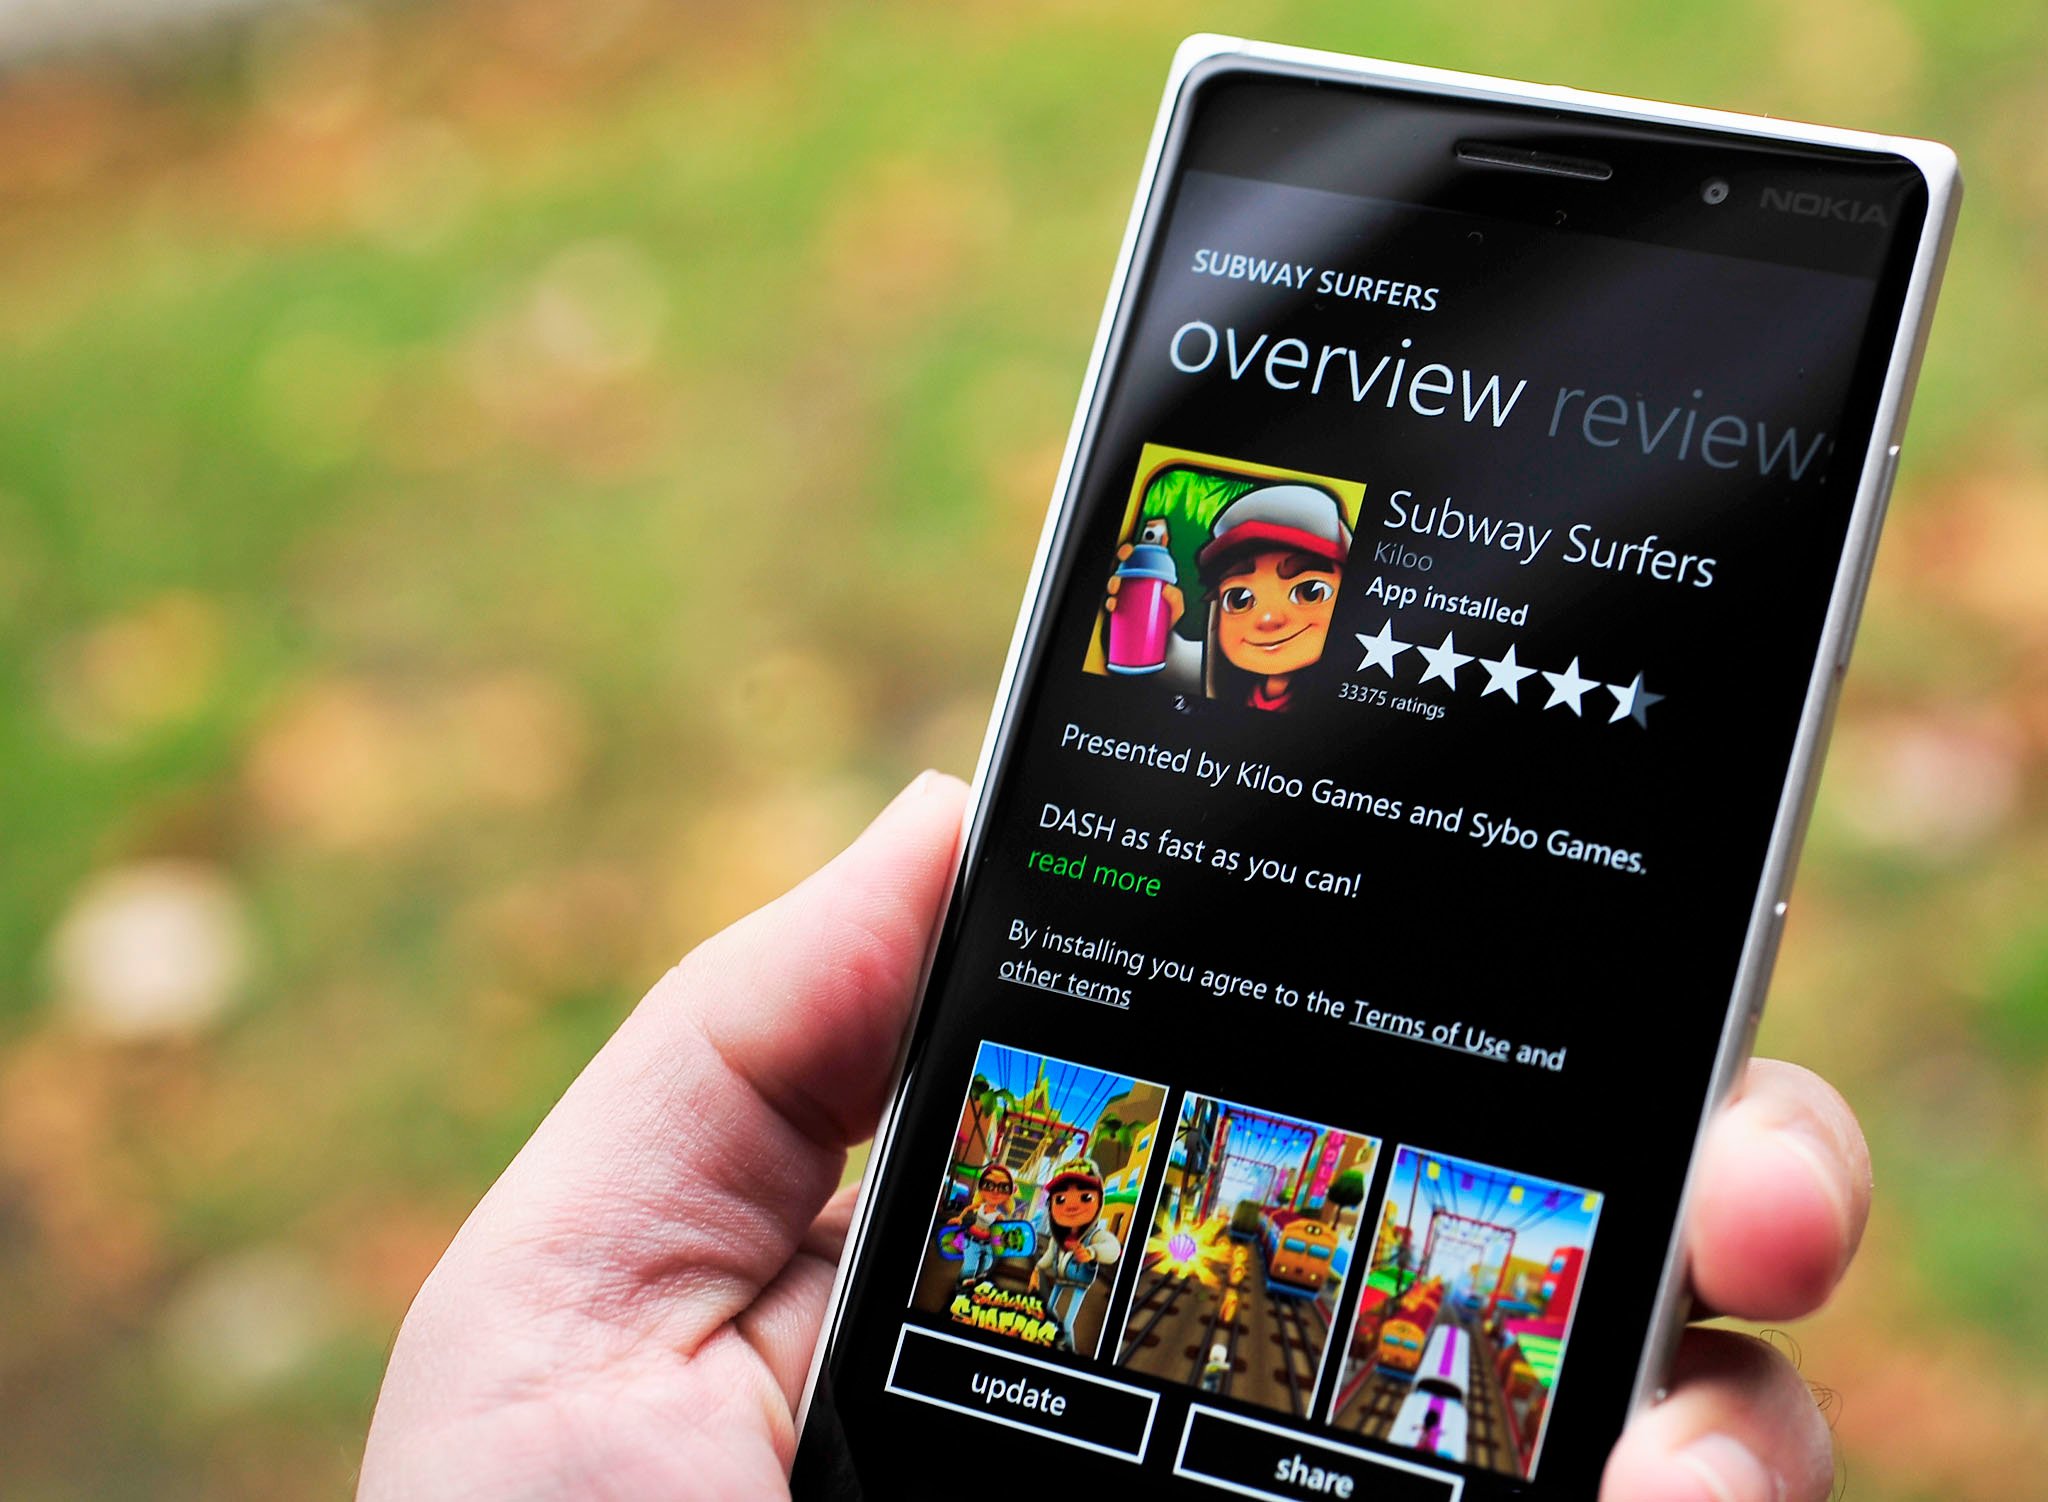 Subway Surfers for Windows Phone, Android, iOS Adds World Tour to Arabia